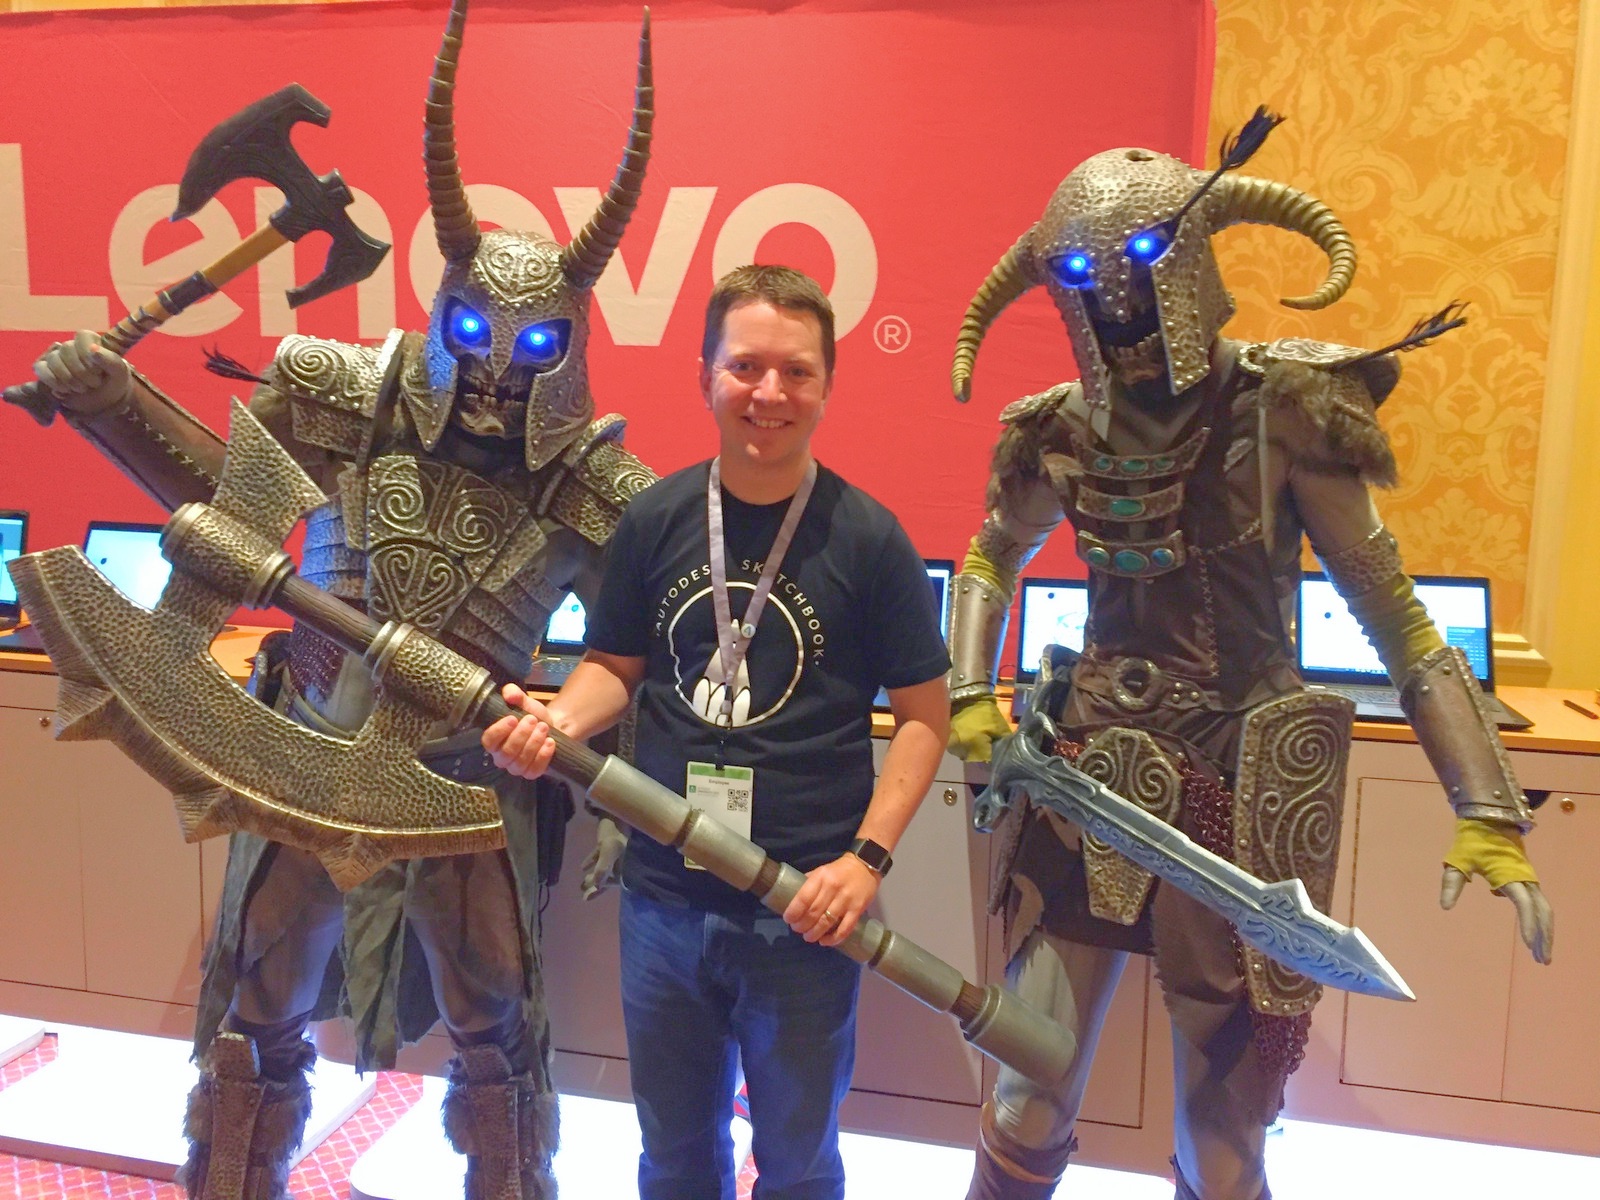 Man posing with monsters at tech conference